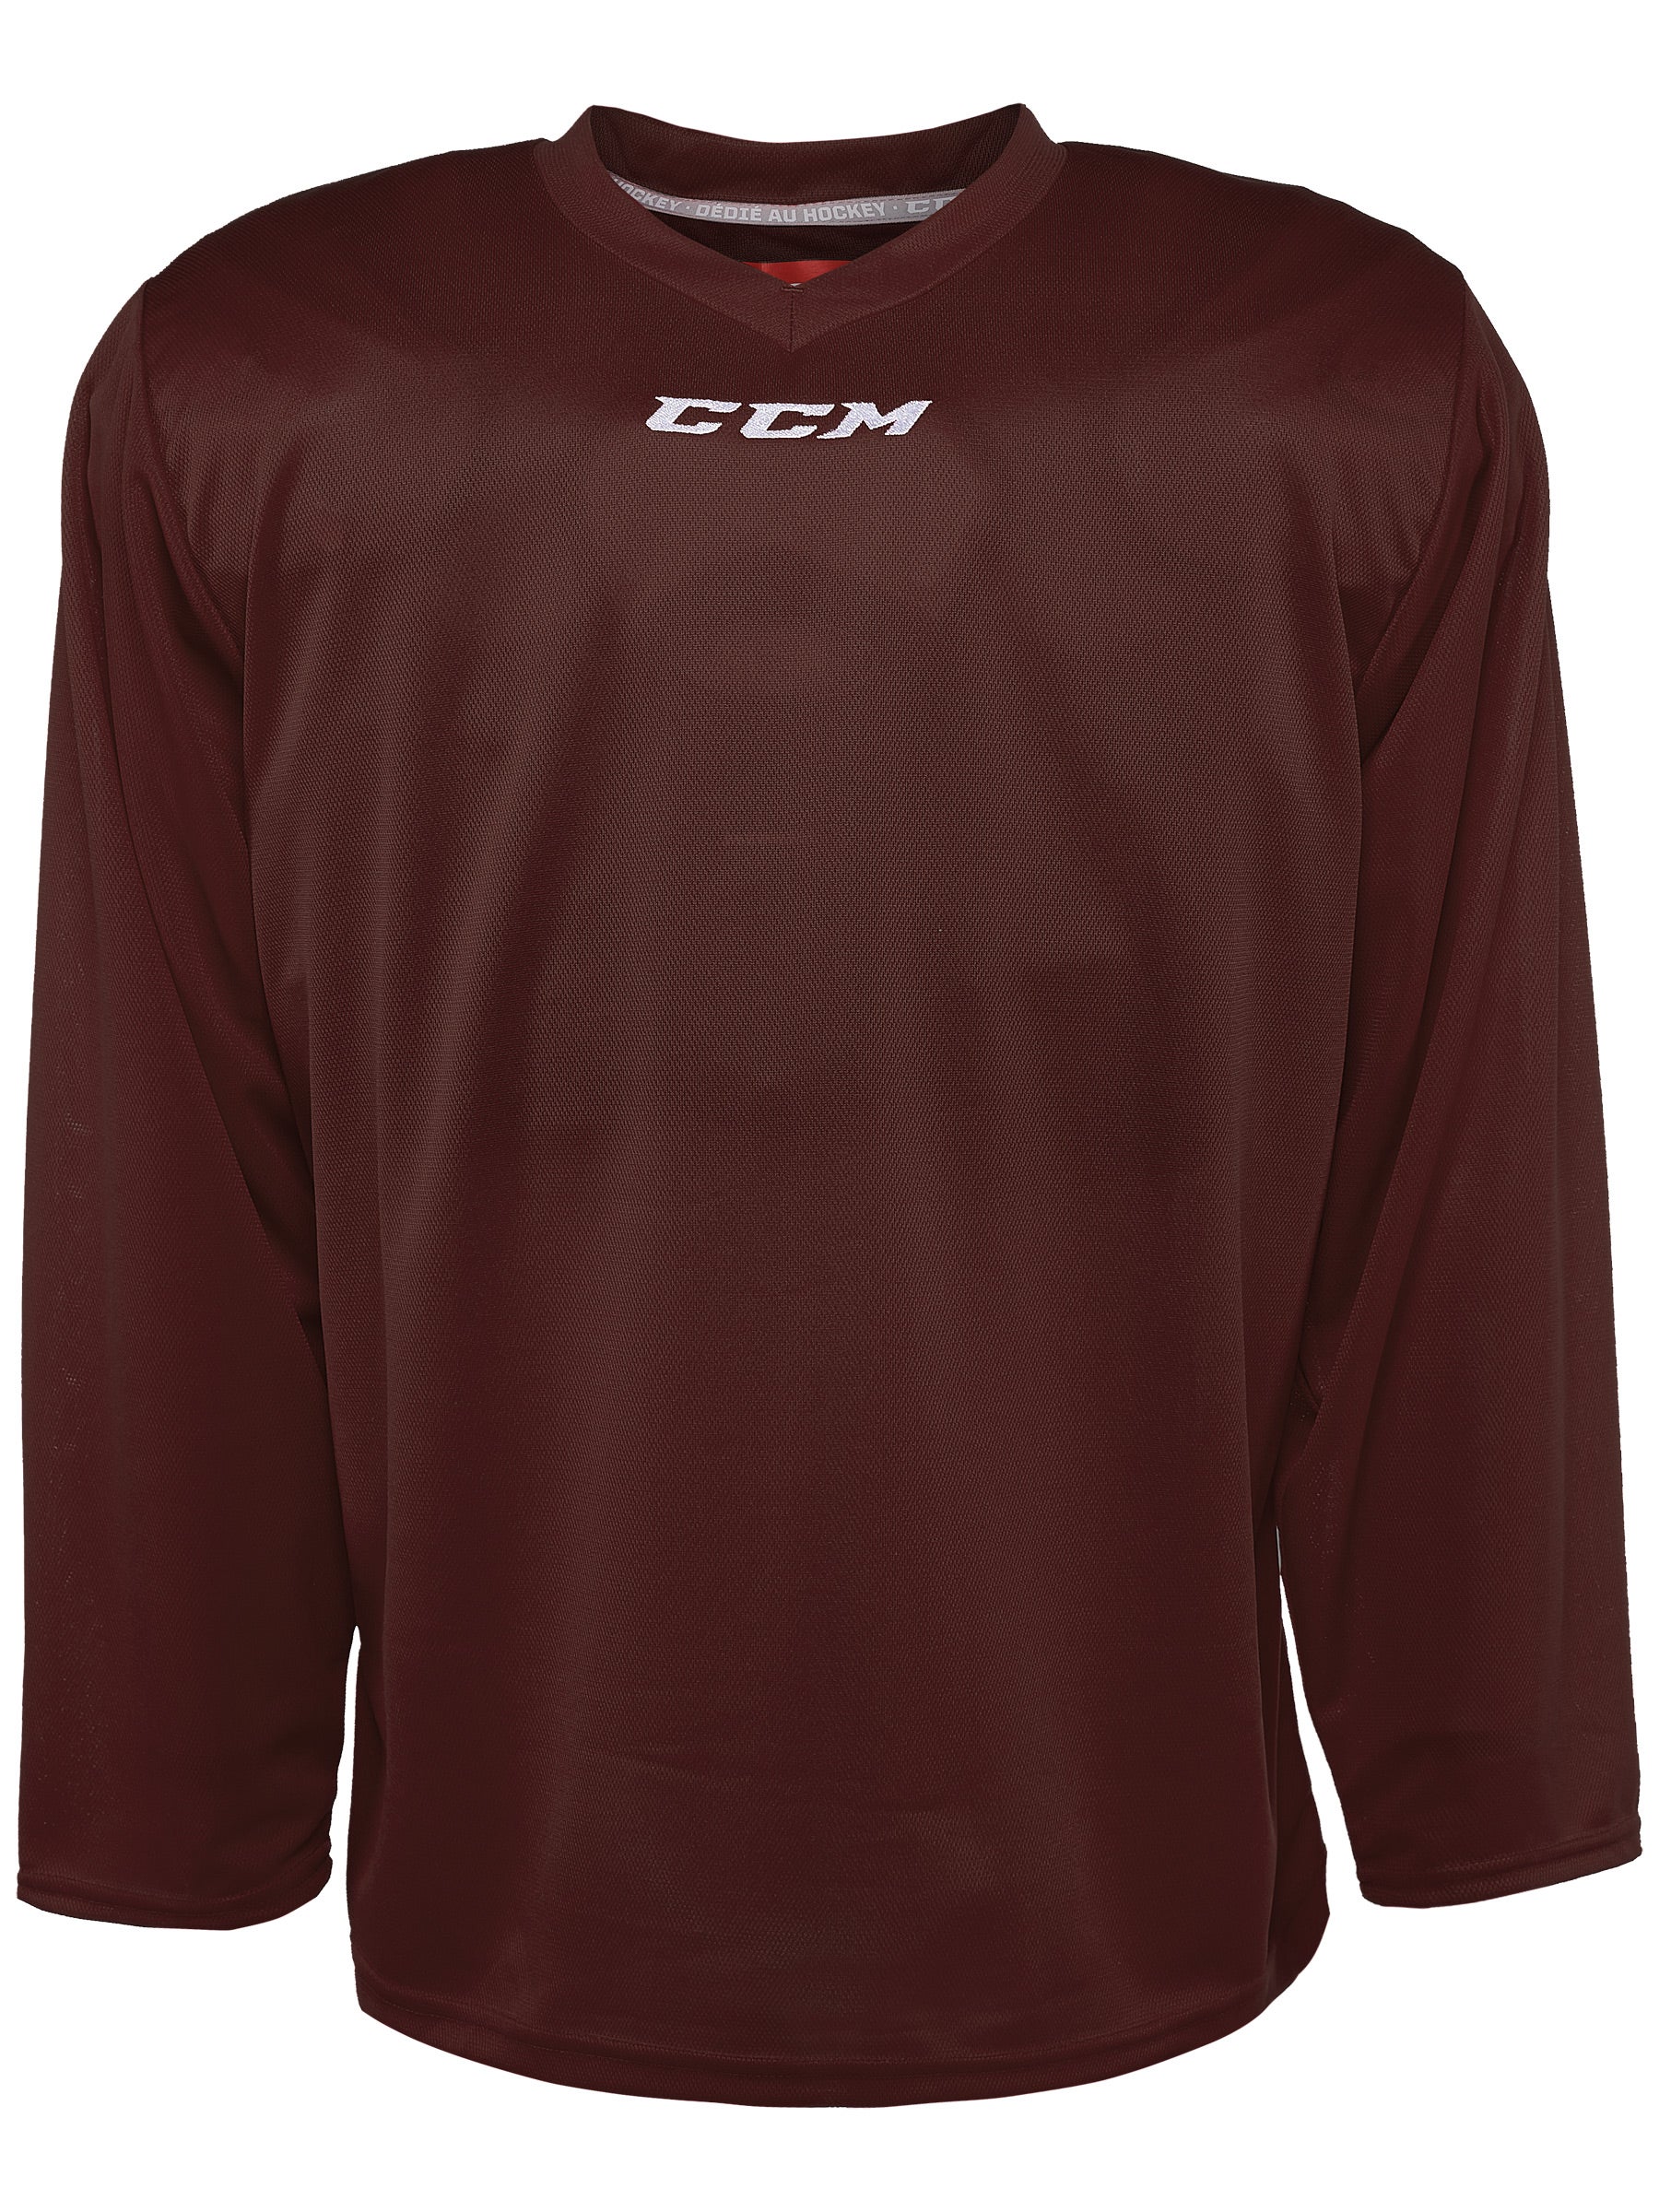 Details about   NWOT ADULT XXL REACH LONG SLEEVE V-NECK PRACTICE JERSEY MAROON 